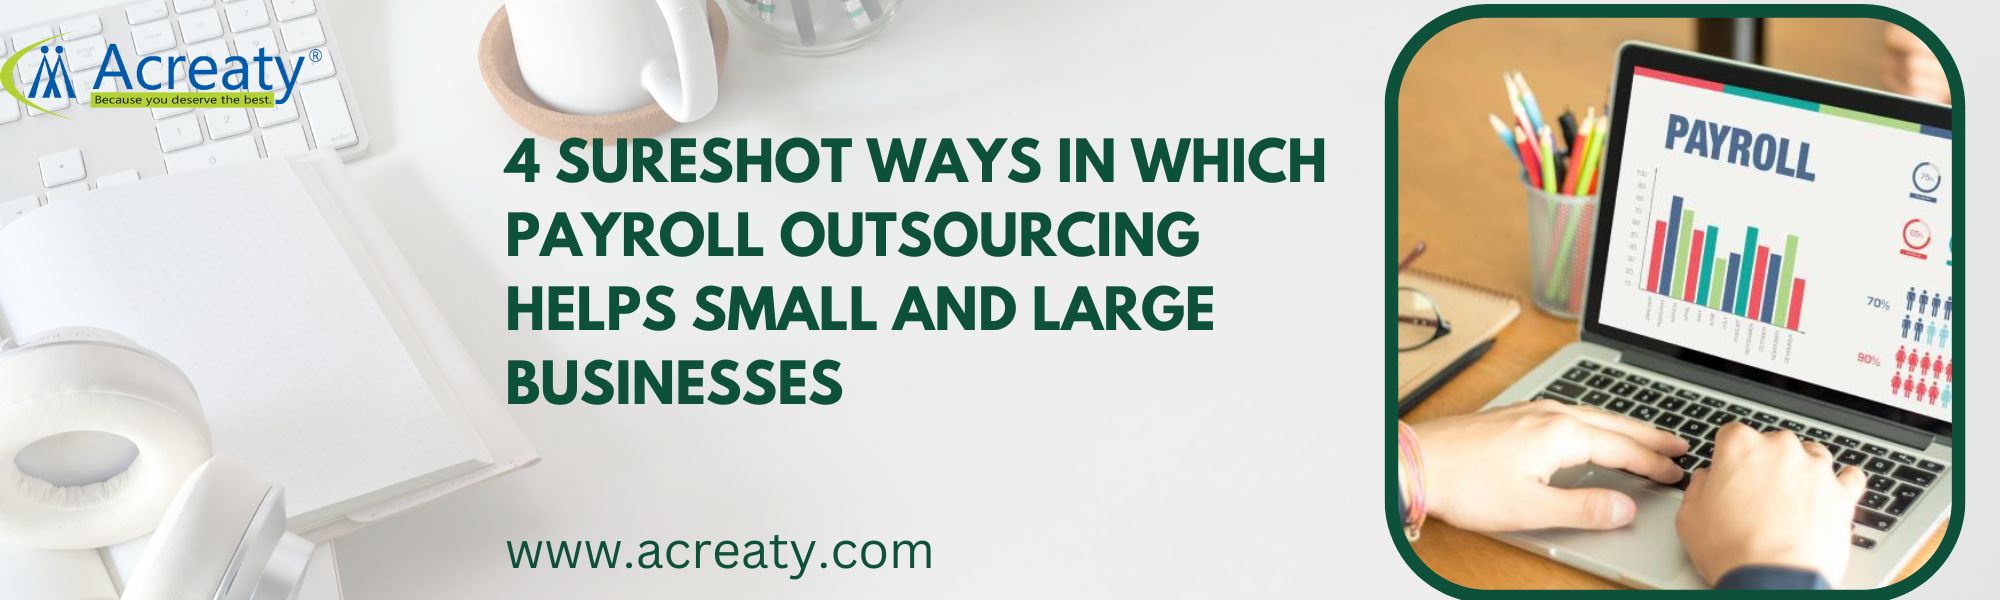 4 Sureshot Ways in Which Payroll Outsourcing Helps Small and Large Businesses